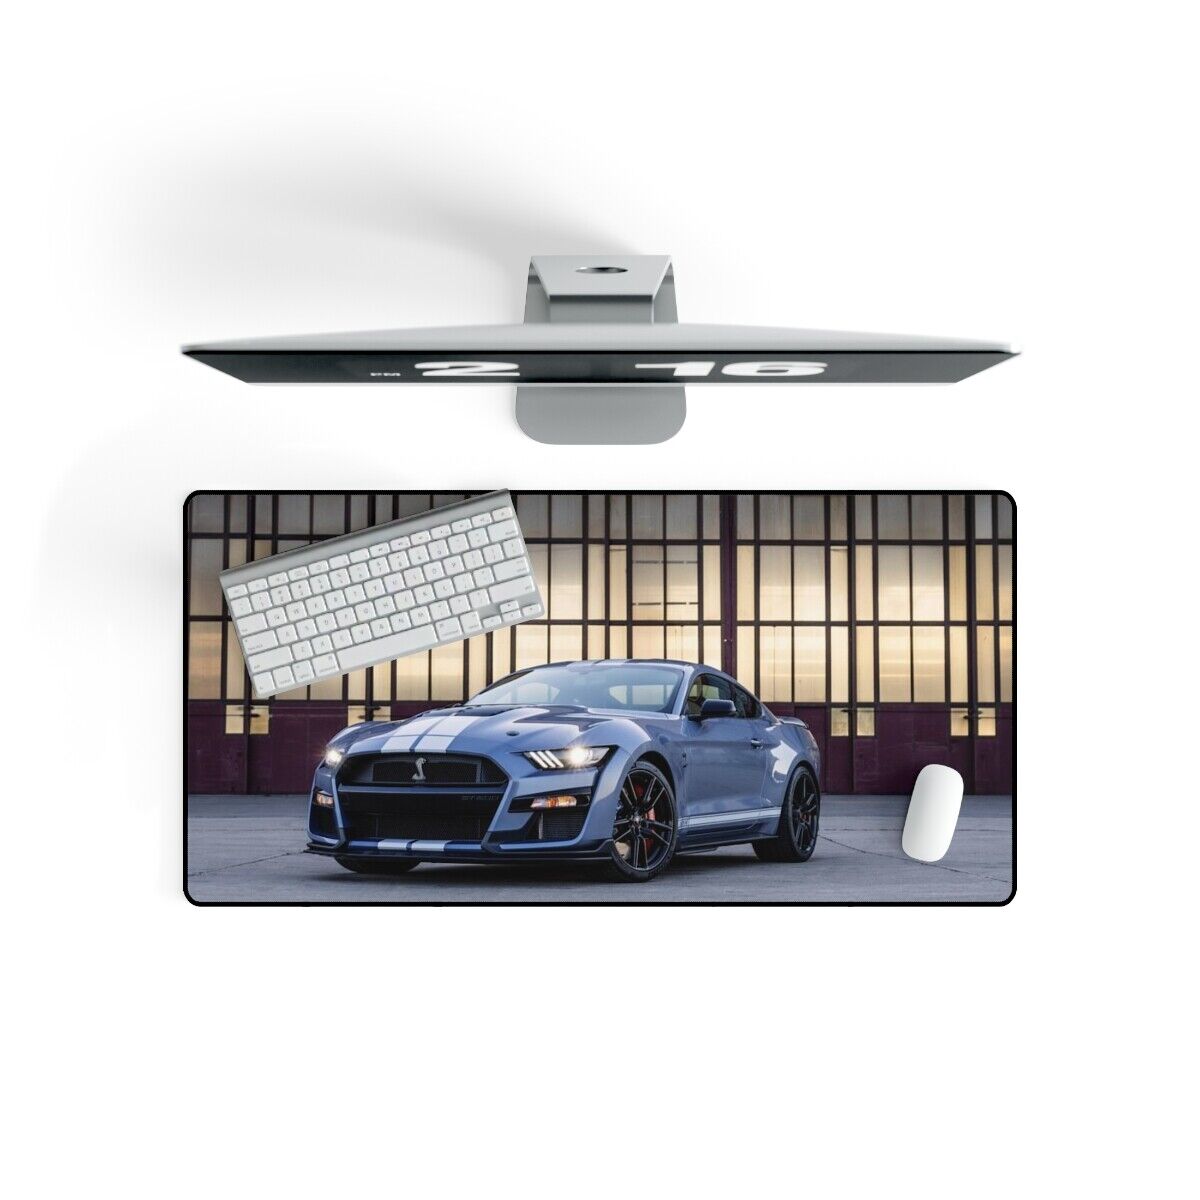 2022 Ford Mustang Shelby GT500 Heritage Edition - Desk Mat Mouse Pad 31.5 × 15.5